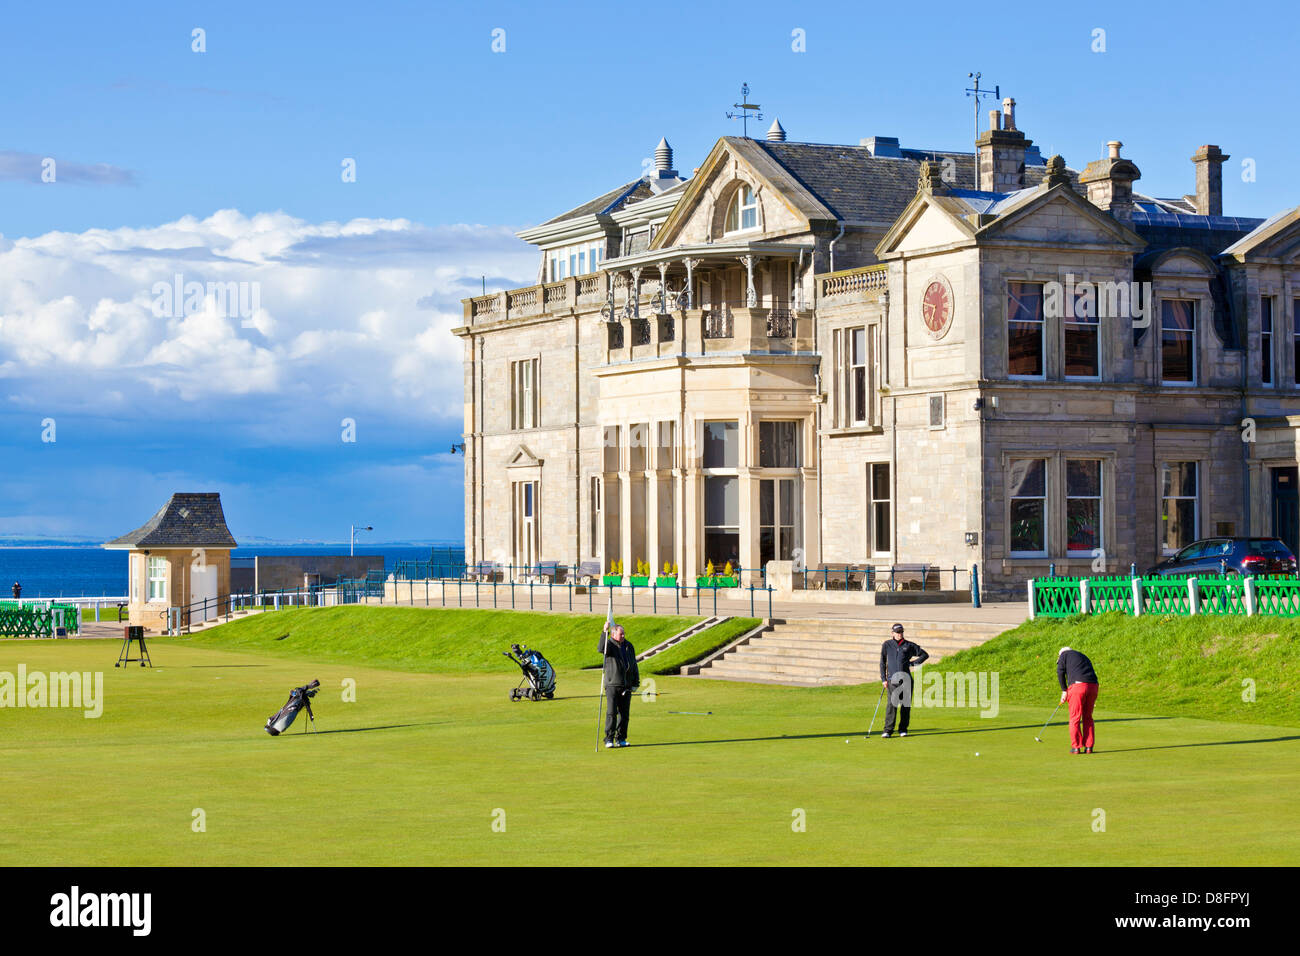 Playing golf The Royal and Ancient Golf Club of St Andrews golf course and club house St Andrews Fife Scotland UK GB EU Europe Stock Photo